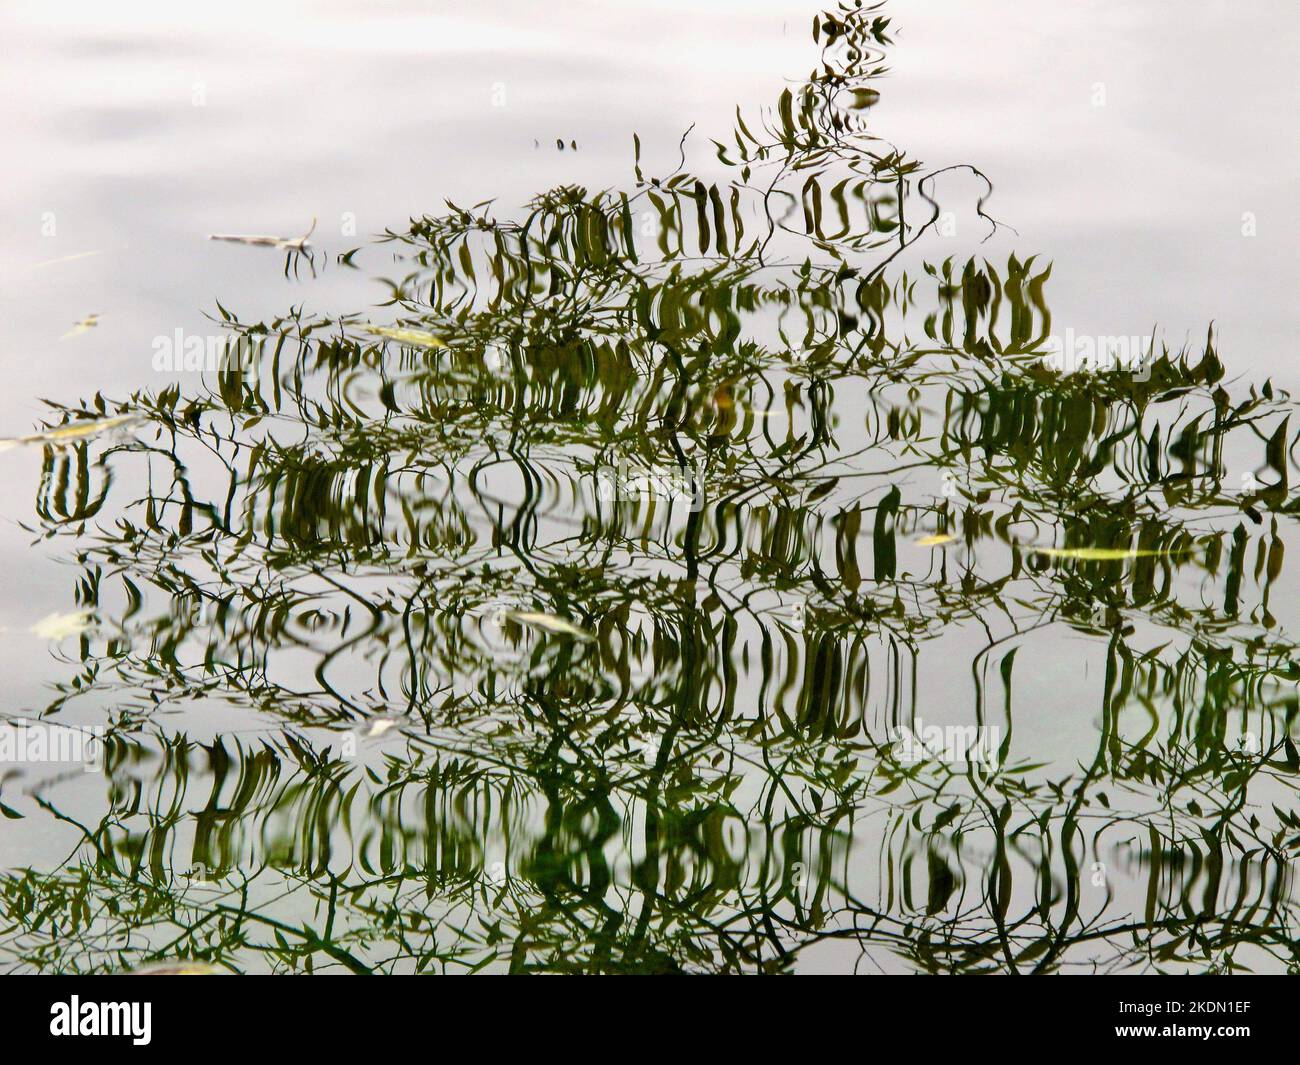 Reflection in the water belonging to a willow tree growing on the shore. Stock Photo